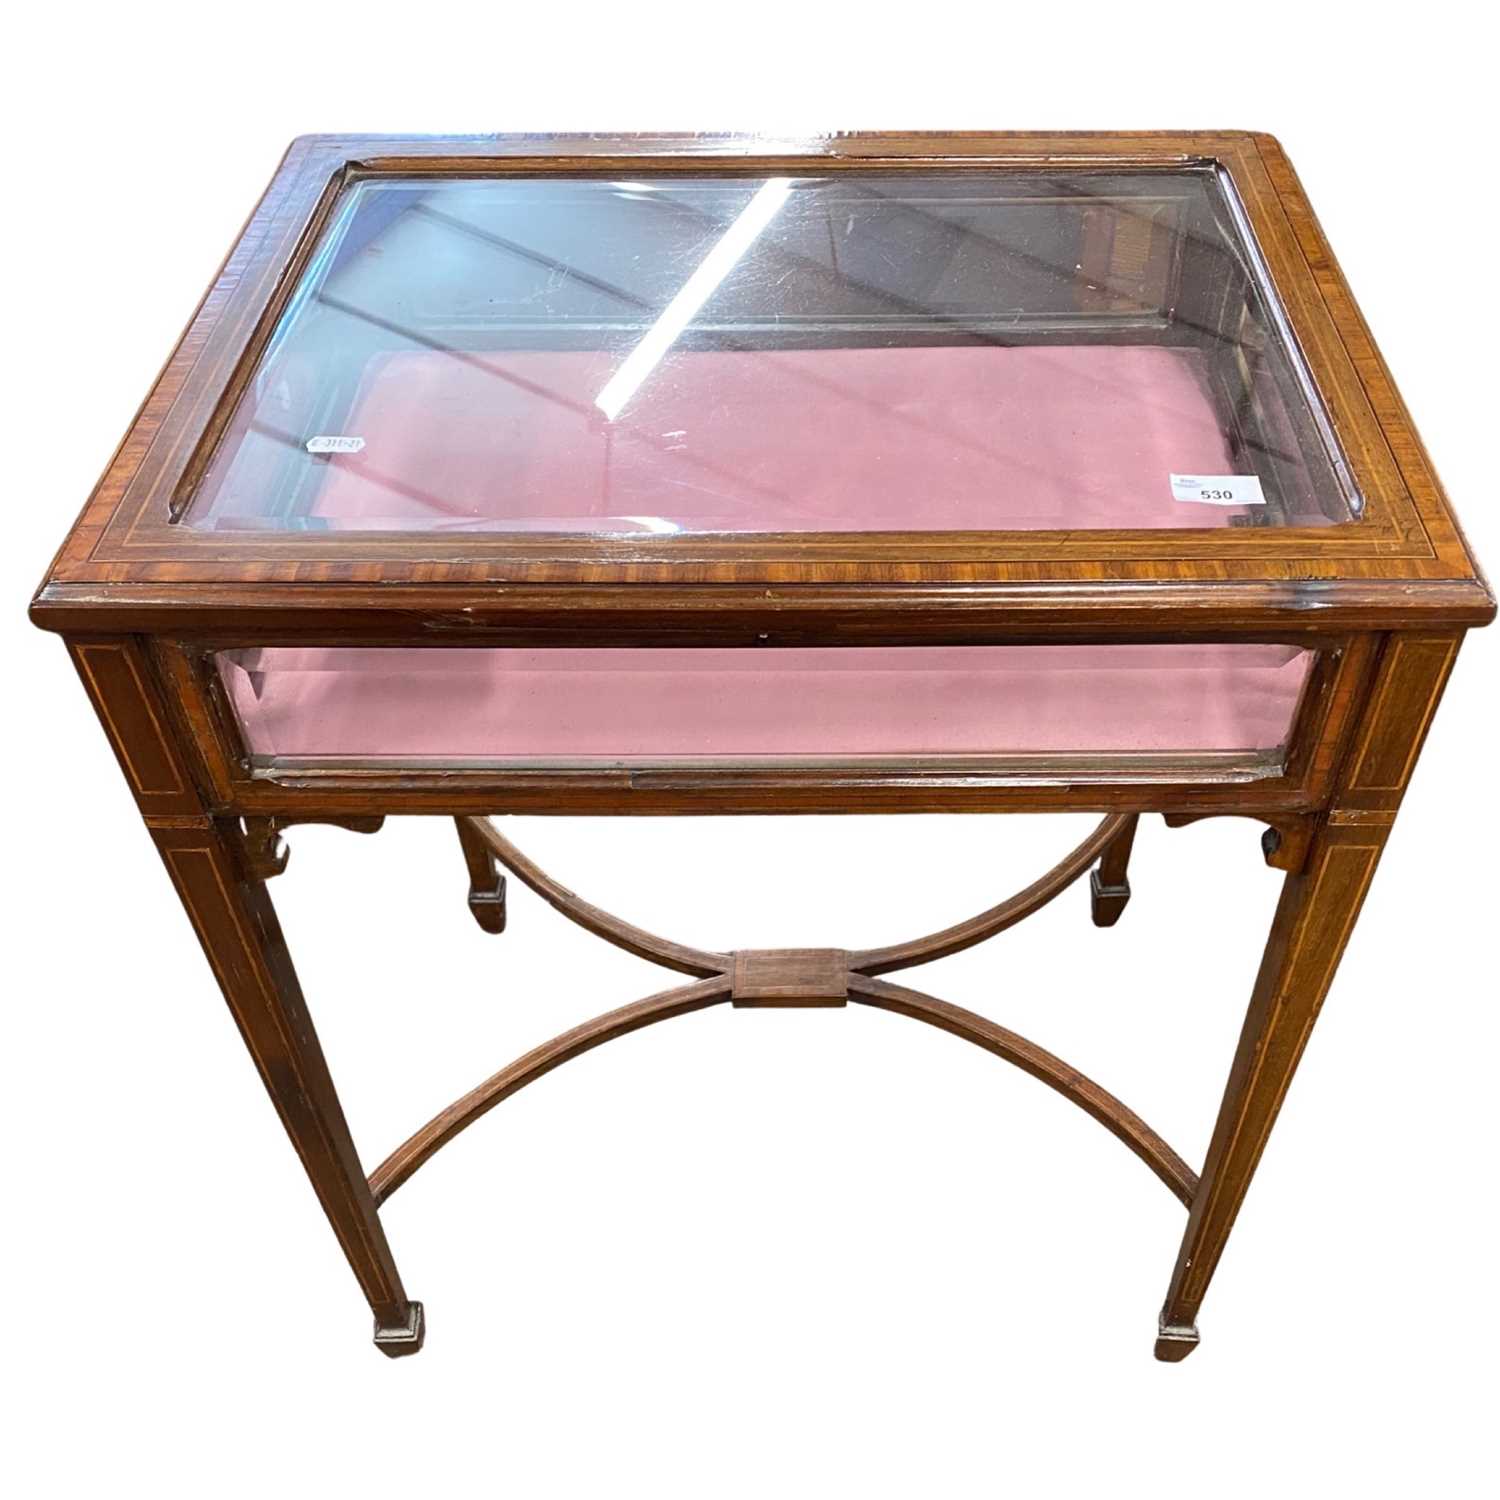 An Edwardian mahogany framed bijouterie table with tapering legs and X formed stretcher, 59cm wide - Image 4 of 4